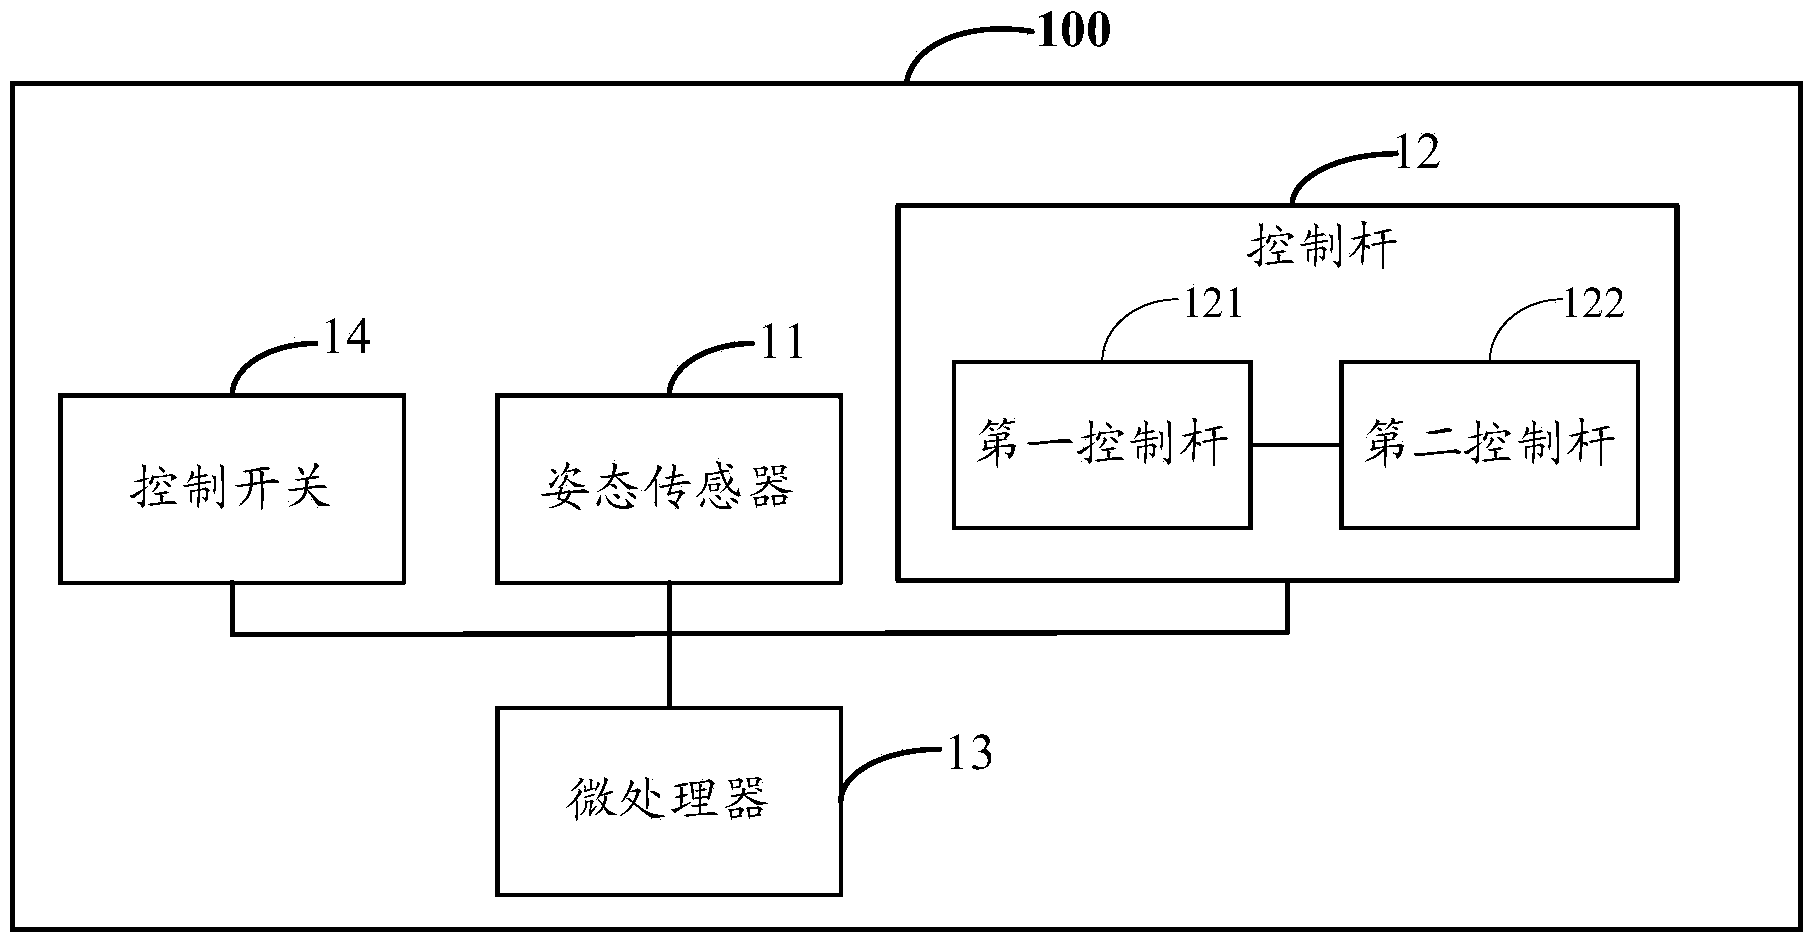 Remote control device, control system and control method